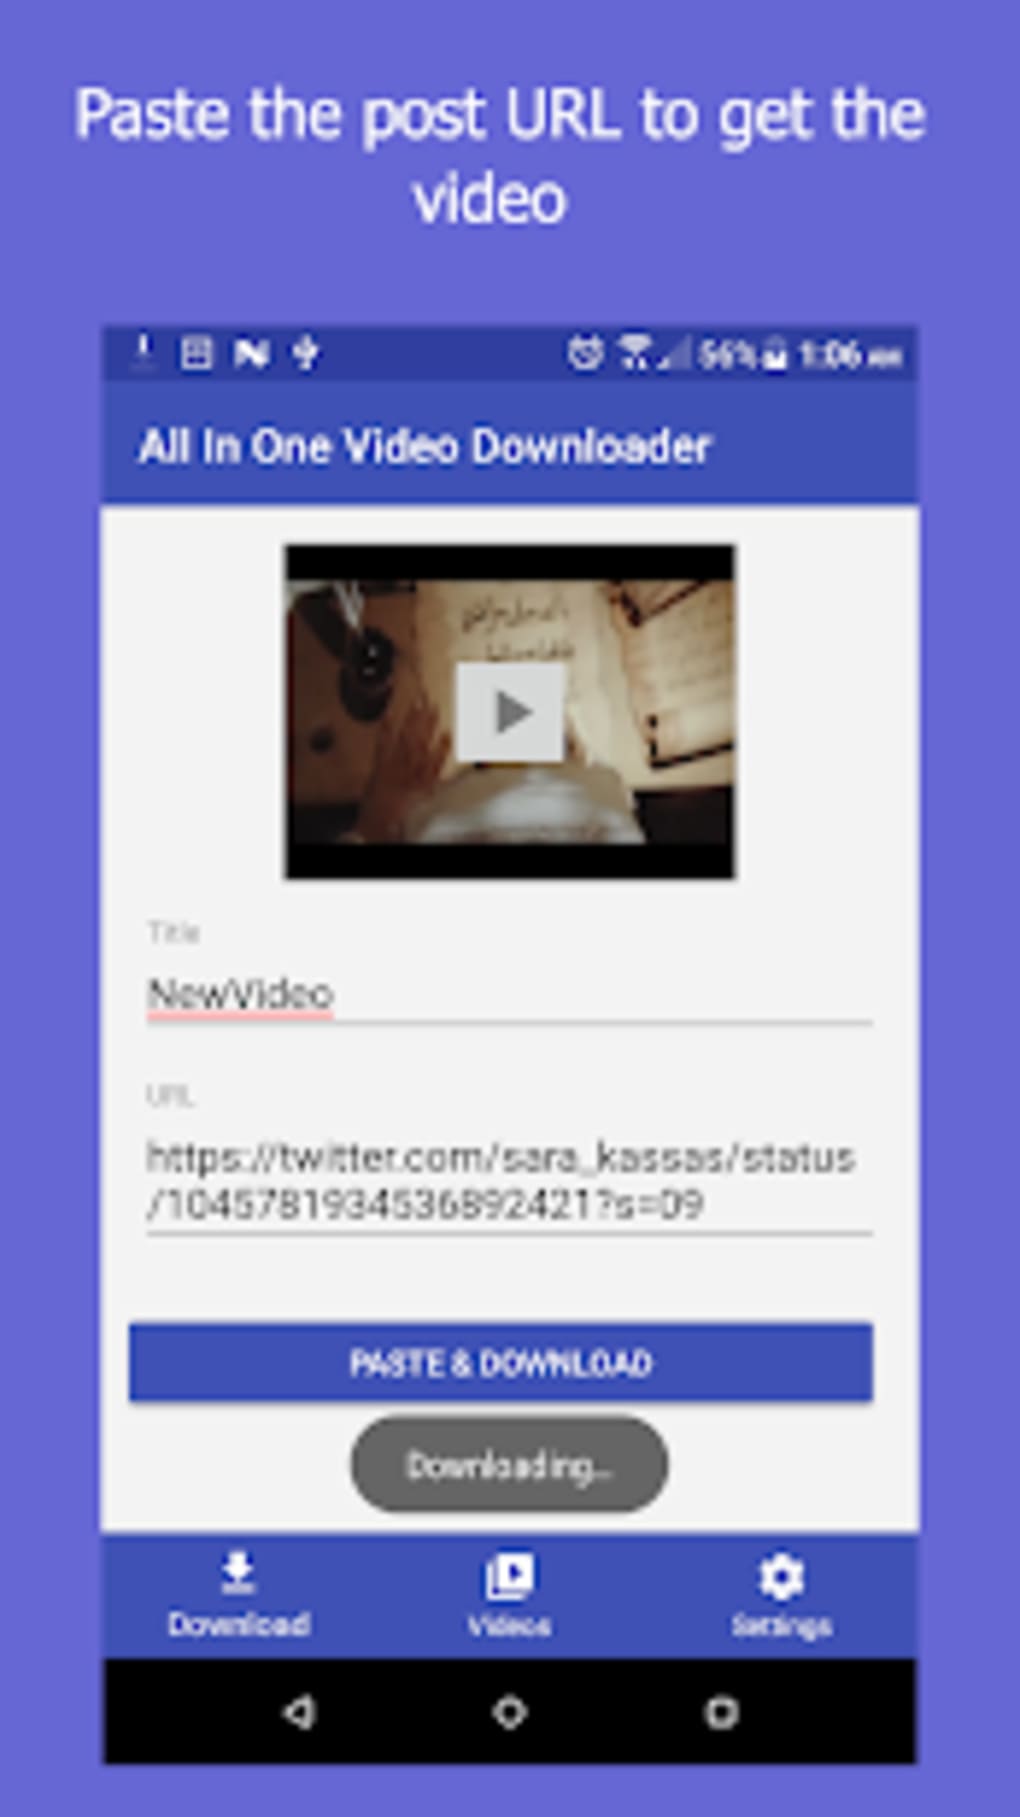 all in one video downloader for android